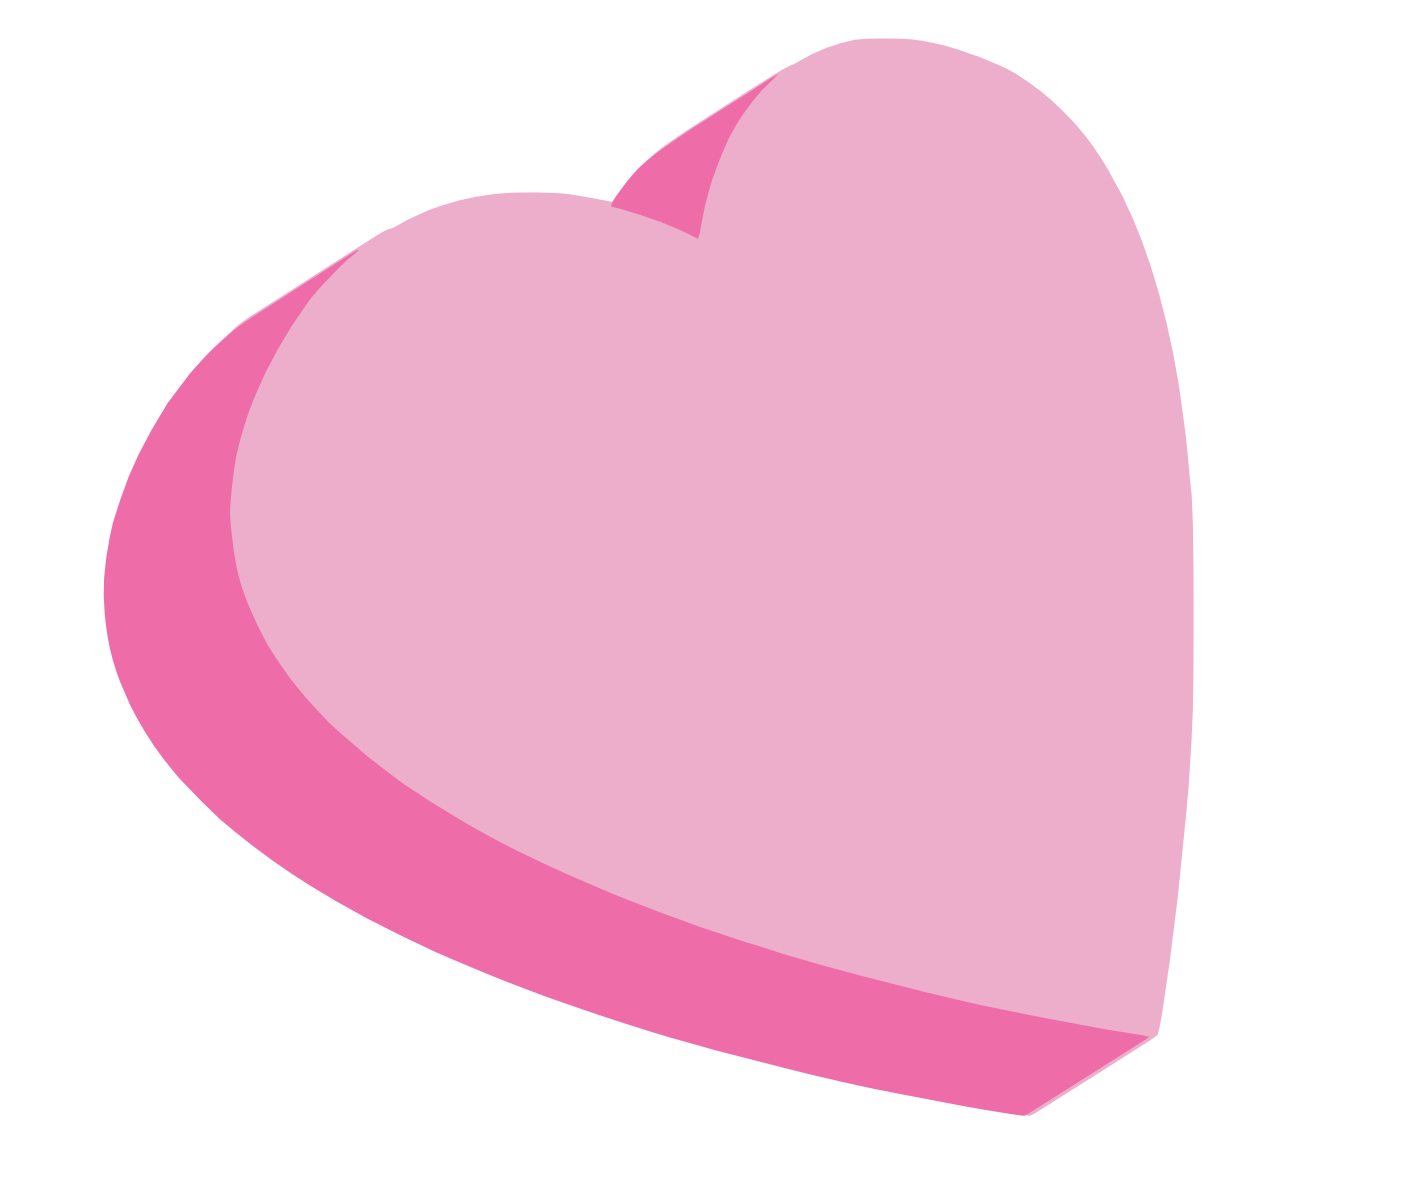 Candy Heart Svg   Tu J S And A Taco